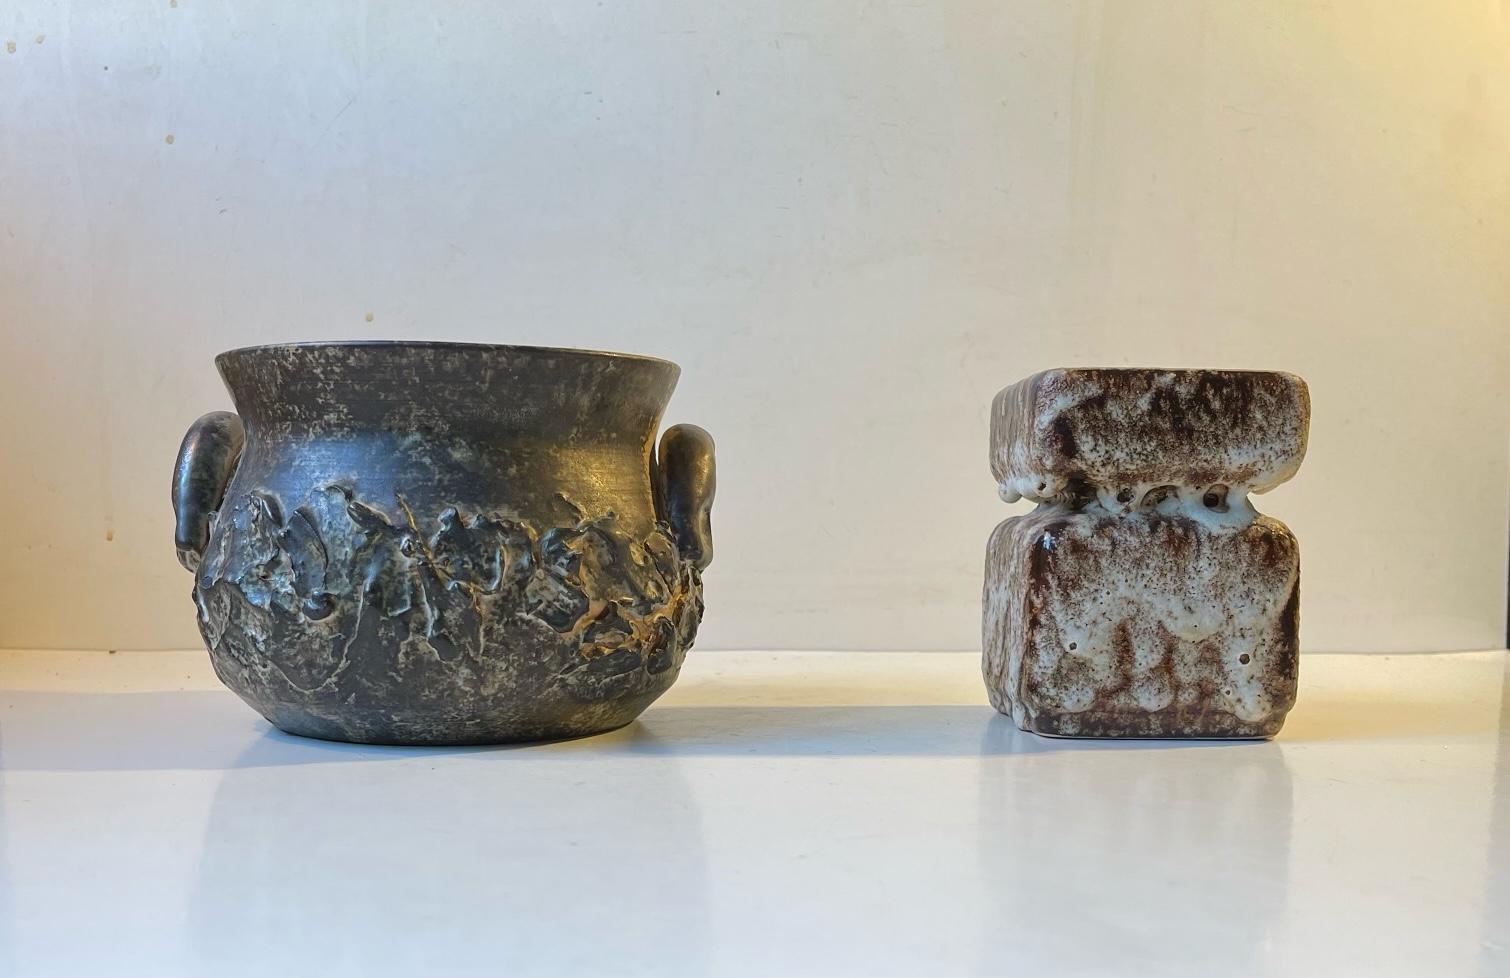 Curated set of 2 ceramic pieces. A pot shaped bowl/planter from Dot keramik in Denmark circa 1970 and an unknown square fat-lava vase or small planter from the the early 1970s. The style of these is brutalism. Measurements: Bowl: 12x15 cm, Vase: